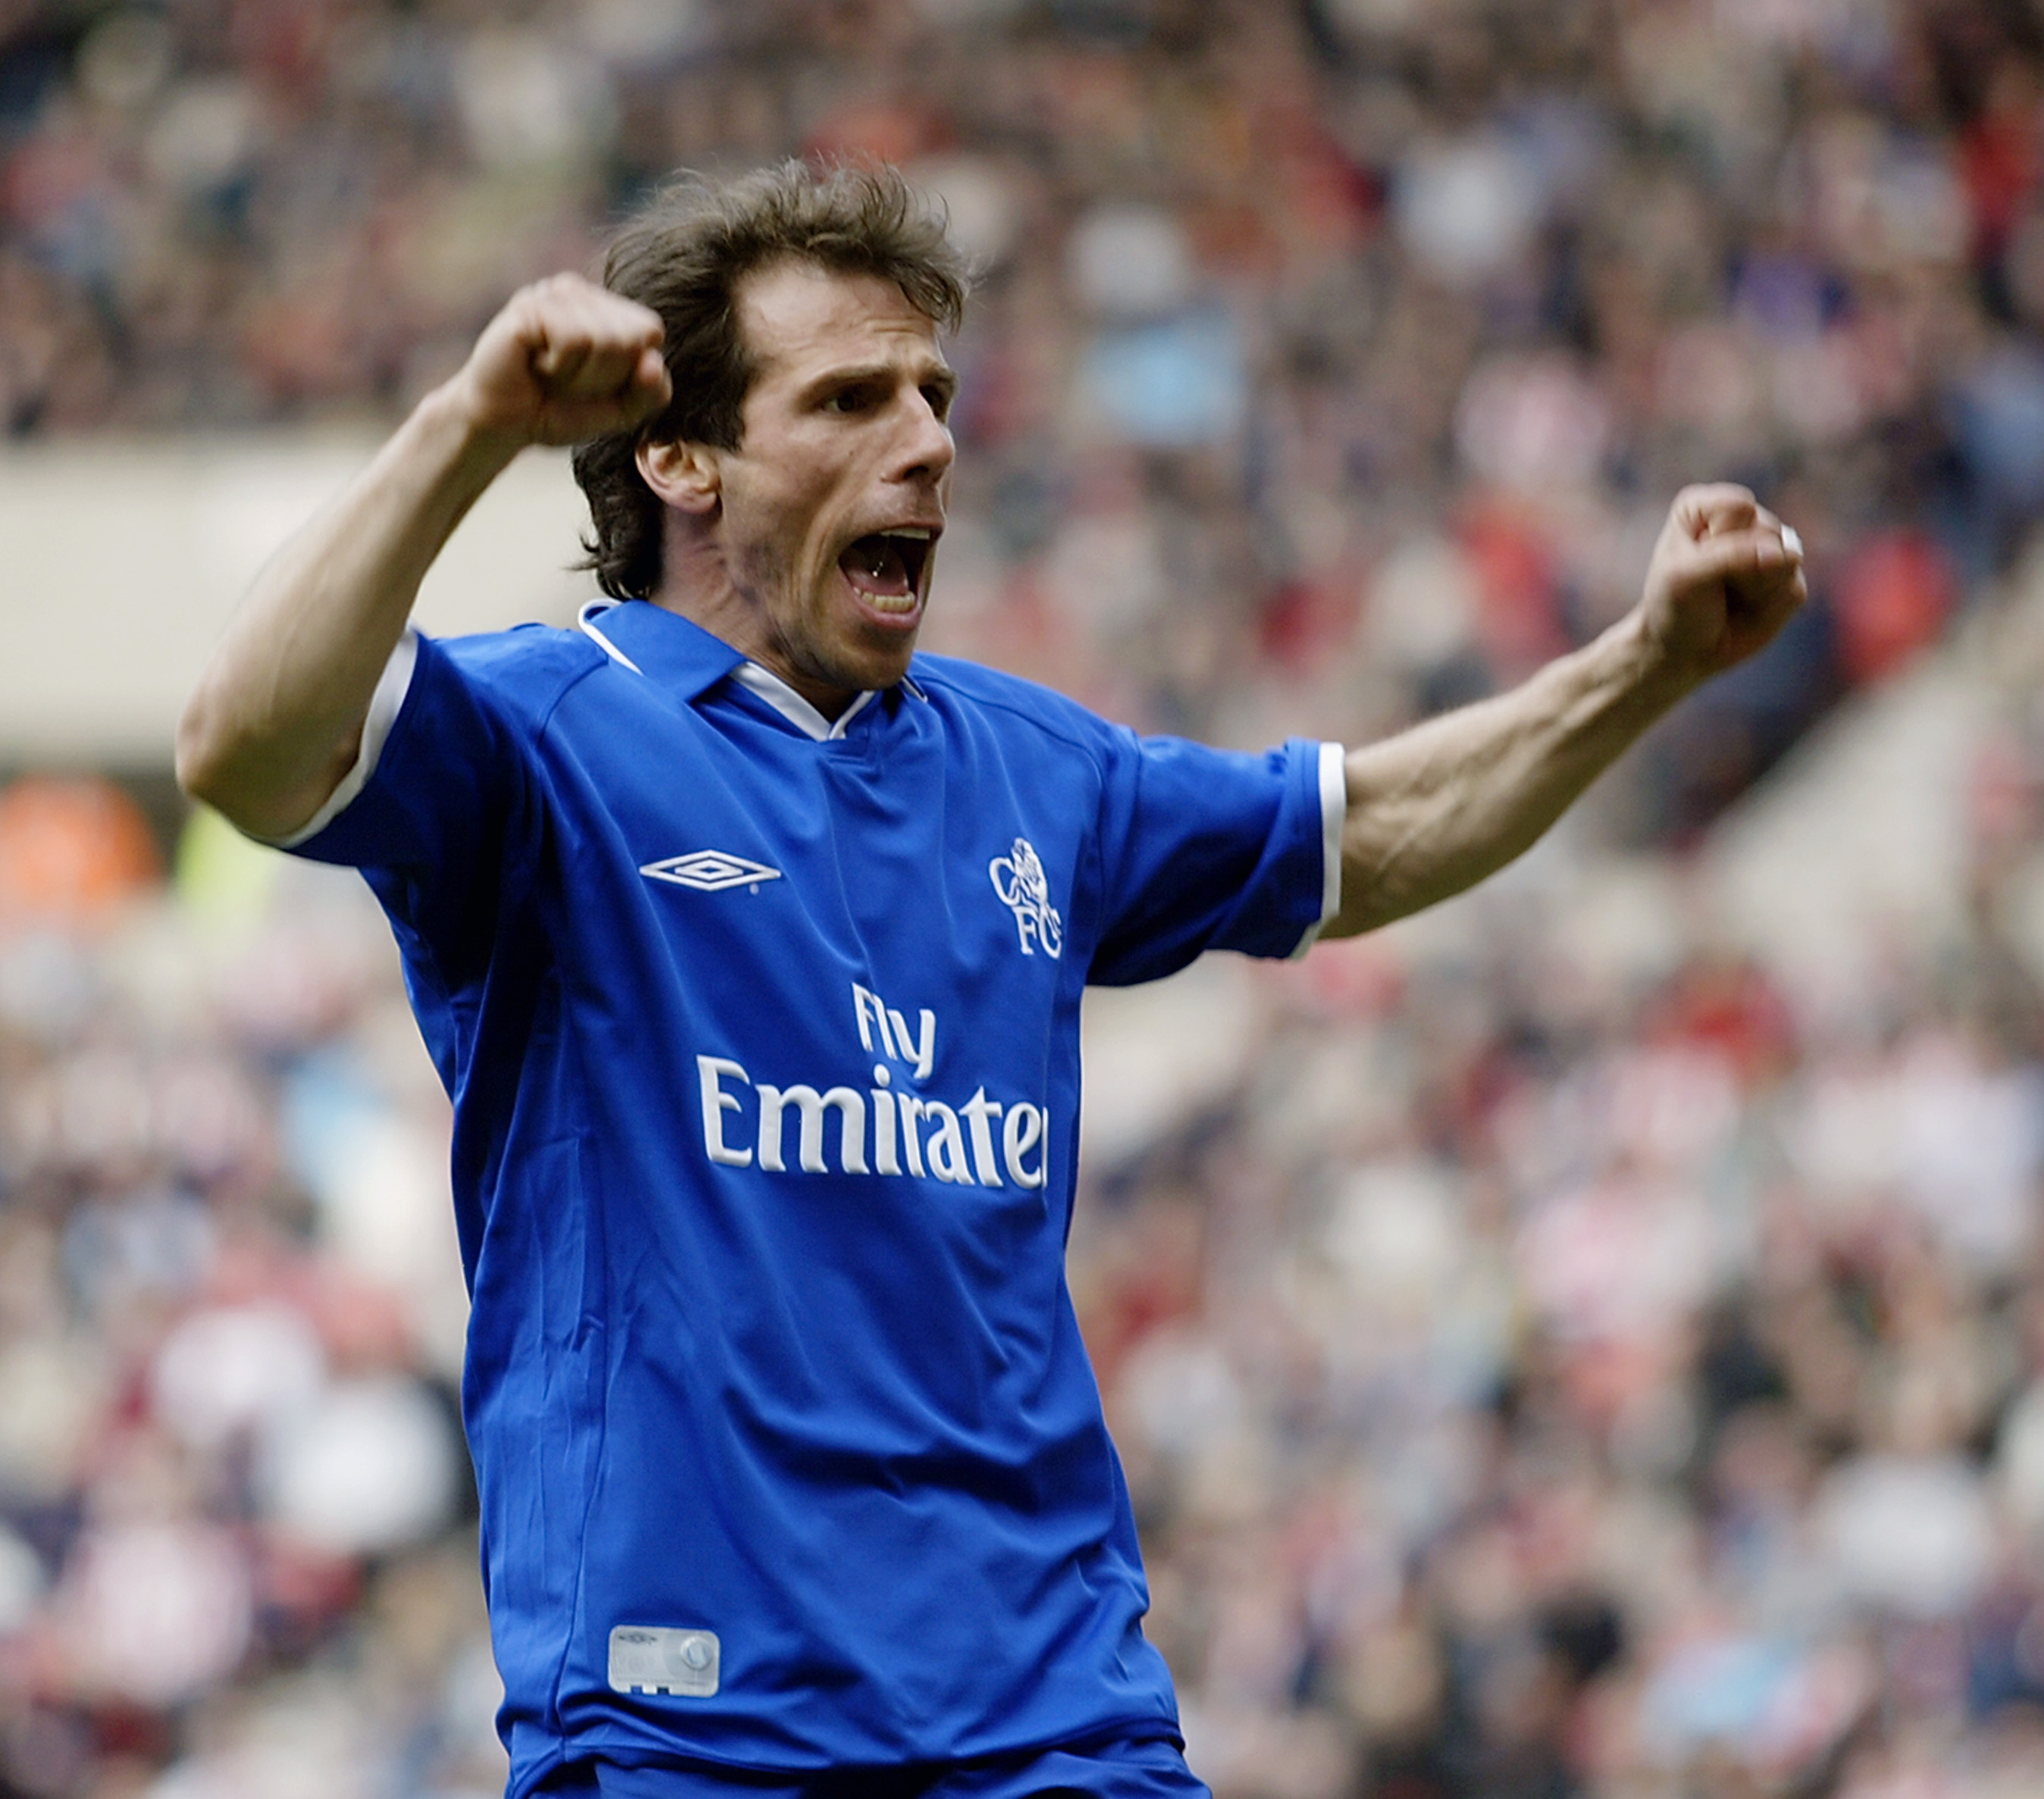 SUNDERLAND -  APRIL 5:  Gianfranco Zola of Chelsea celebrates scoring the equalising goal during the FA Barclaycard Premiership match between Sunderland and Chelsea held on April 5, 2003 at the Stadium of Light, in Sunderland, England. Chelsea won the mat